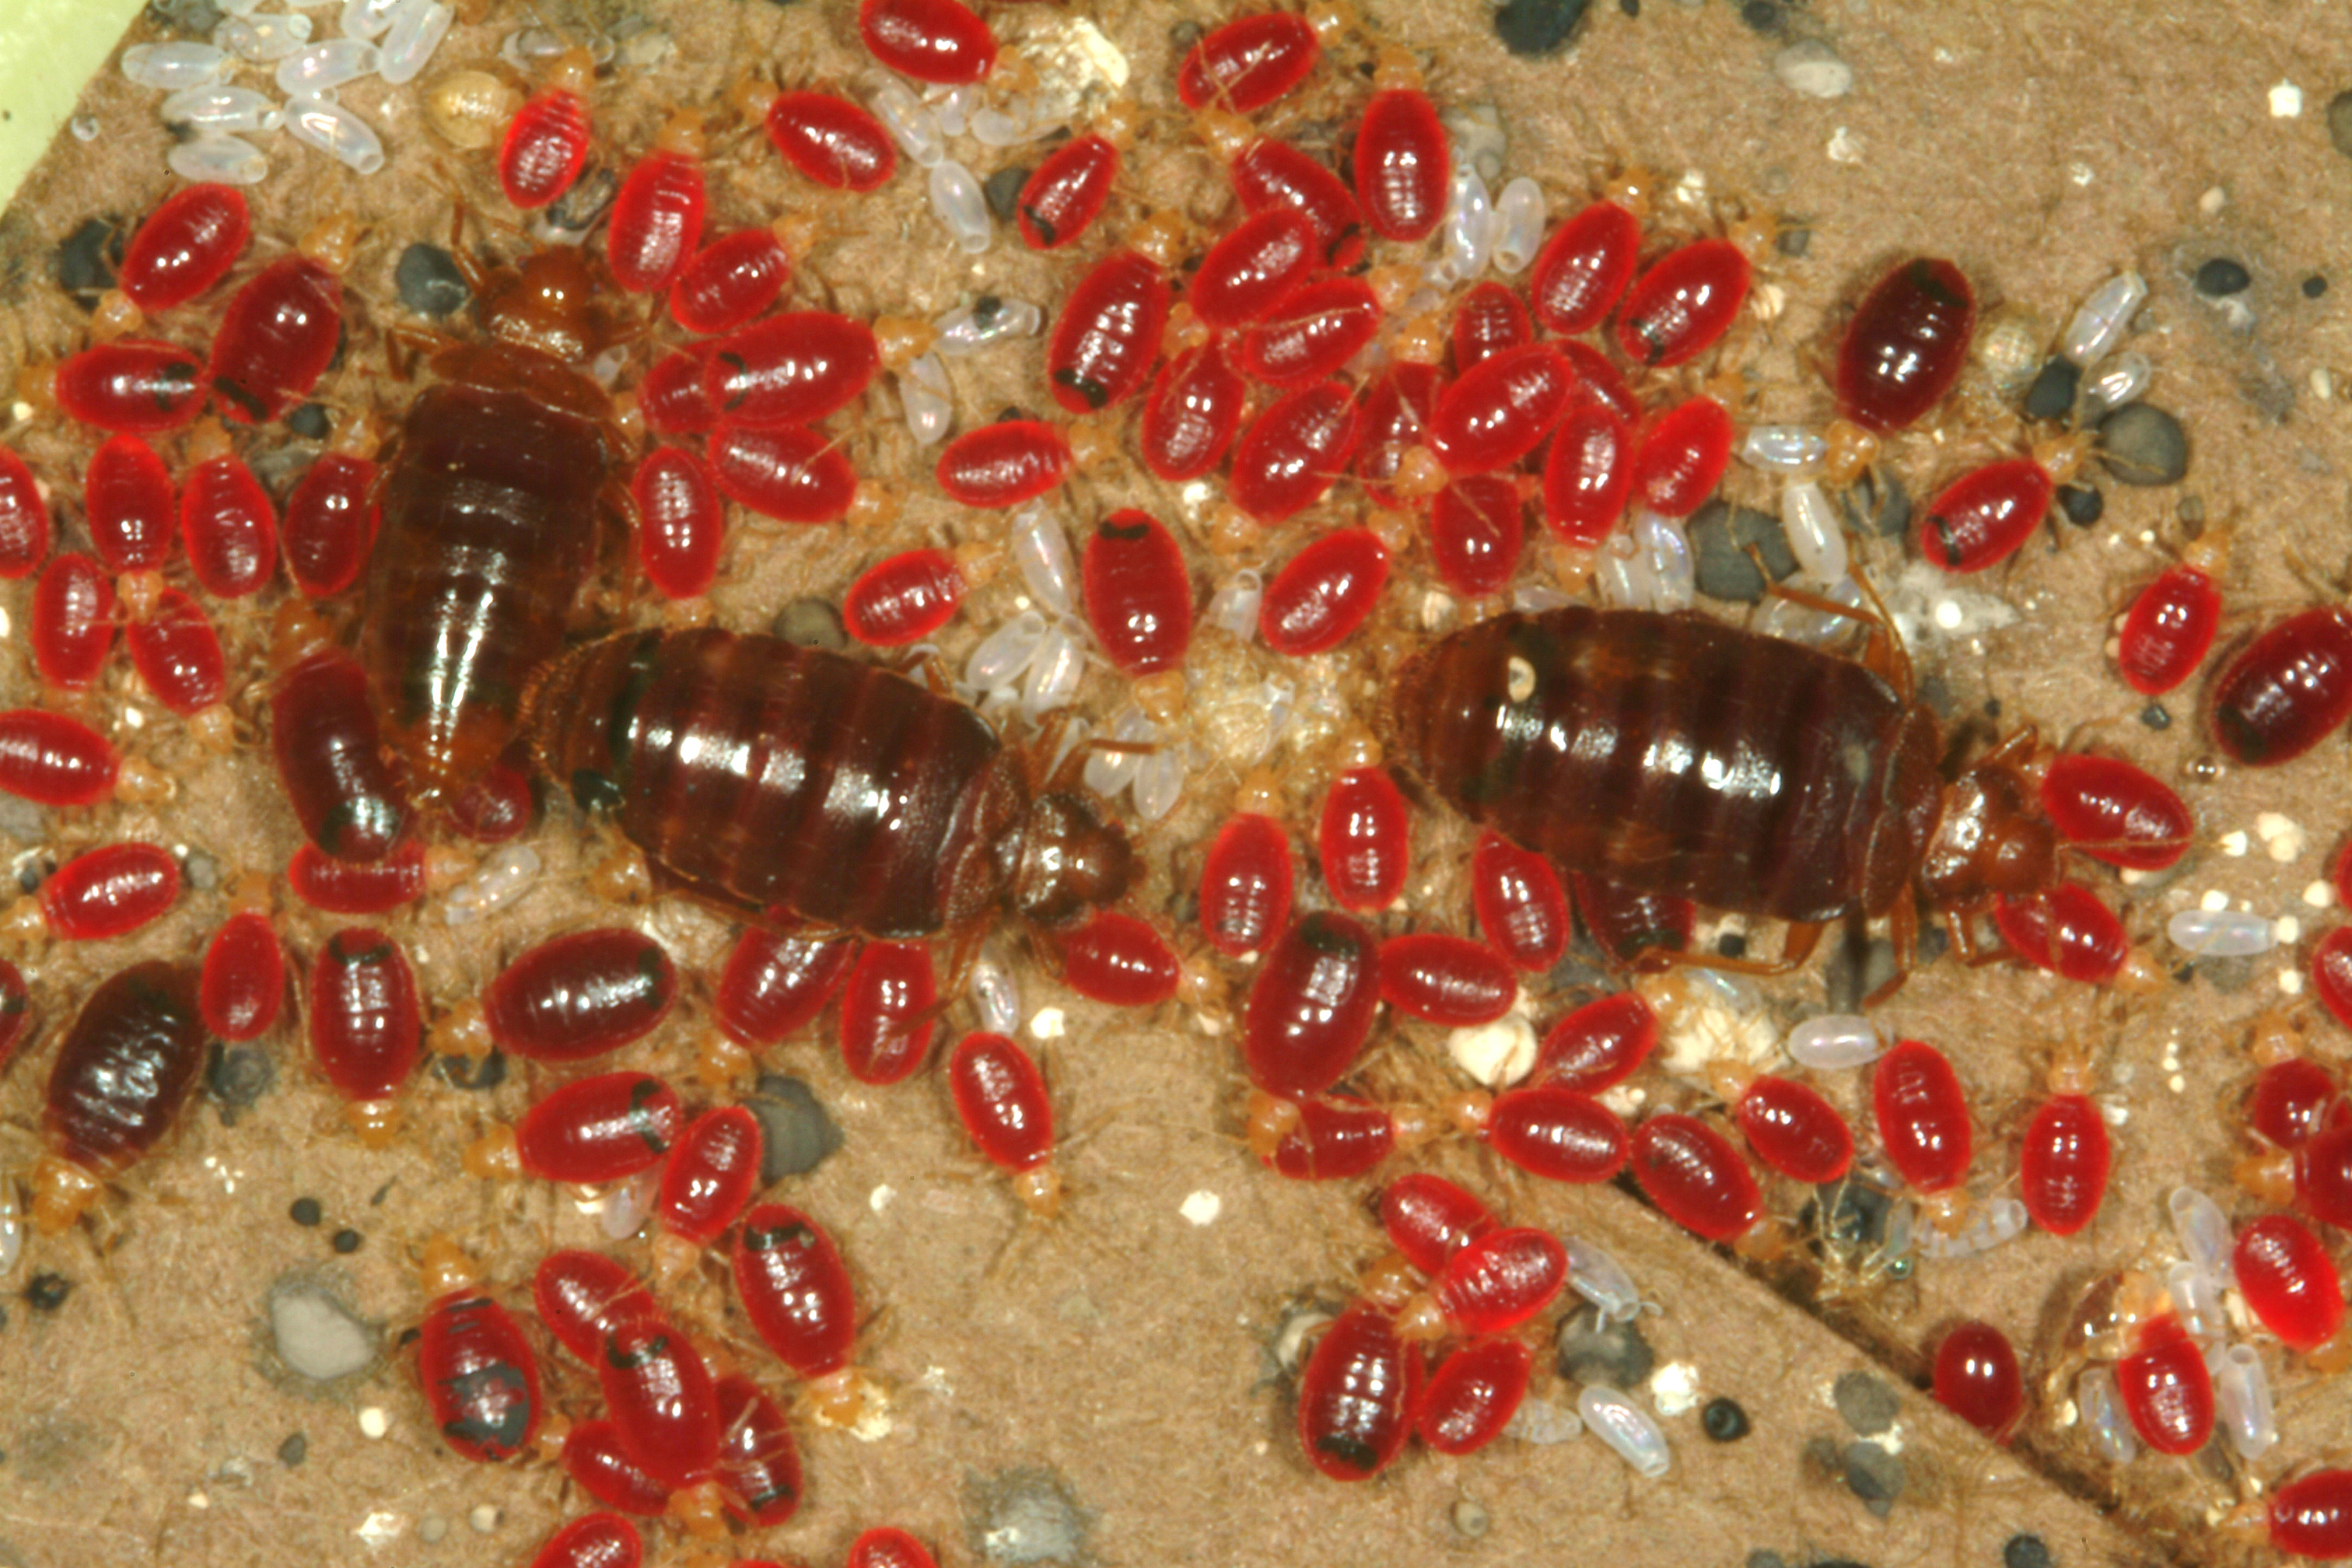 Chemical Resistance Of Bed Bugs